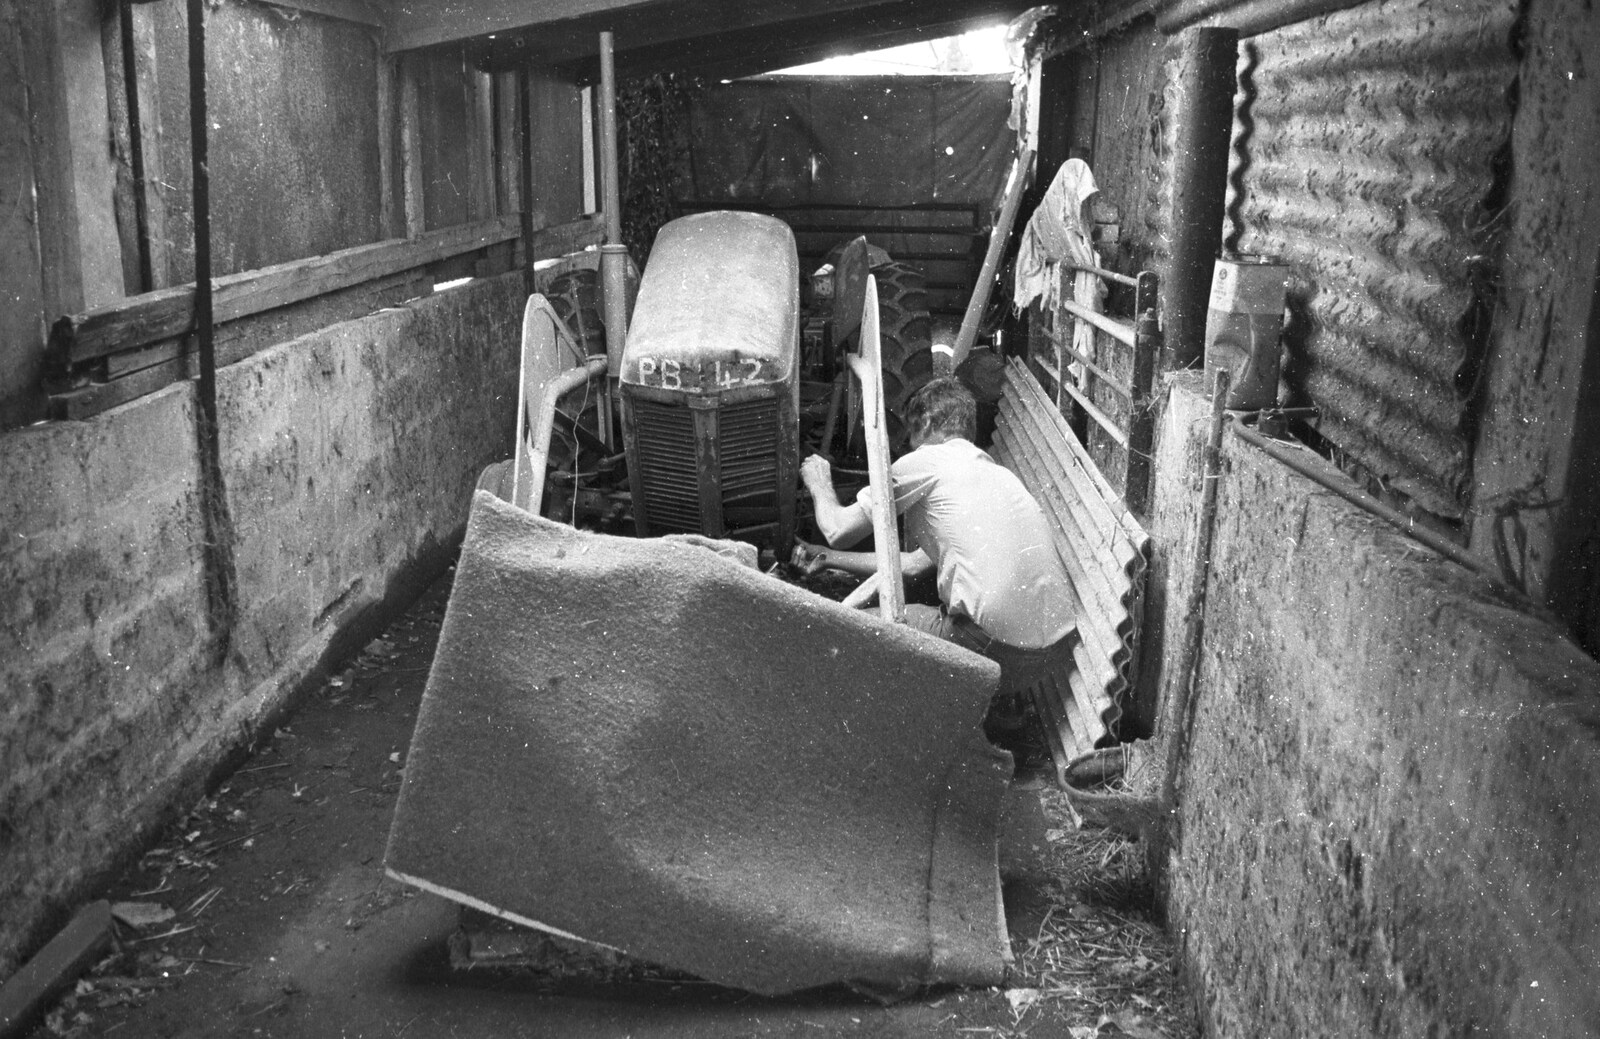 A Black and White Life in Concrete, Stuston, Suffolk - 3rd September 1992: Geoff pokes around with Winnie